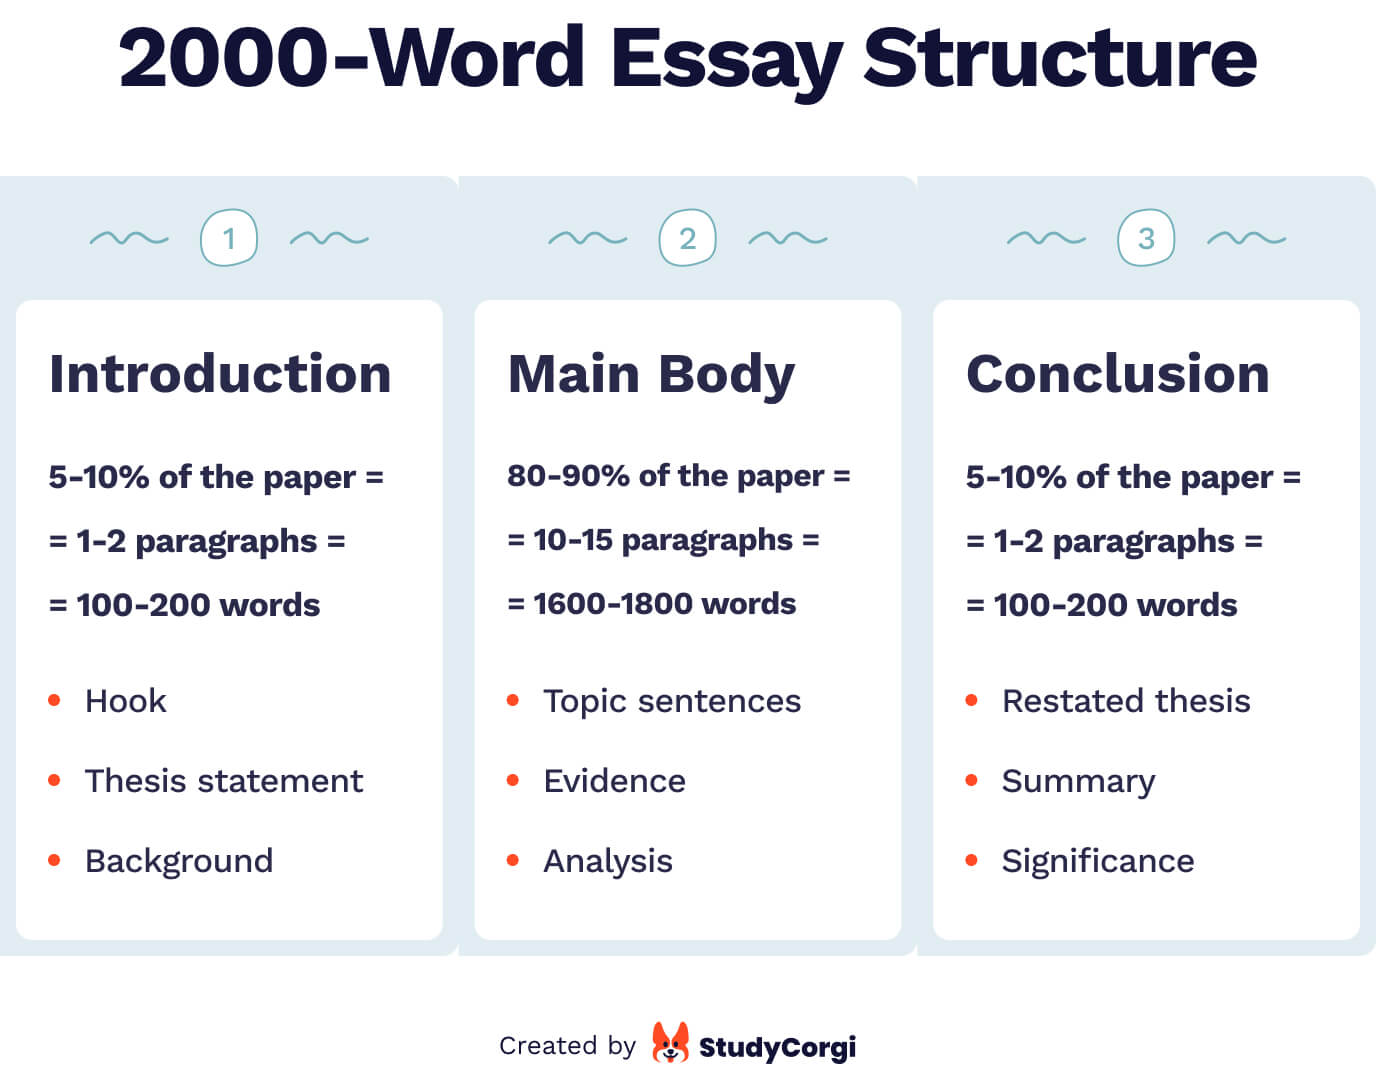 can chatgpt write a 2000 word essay